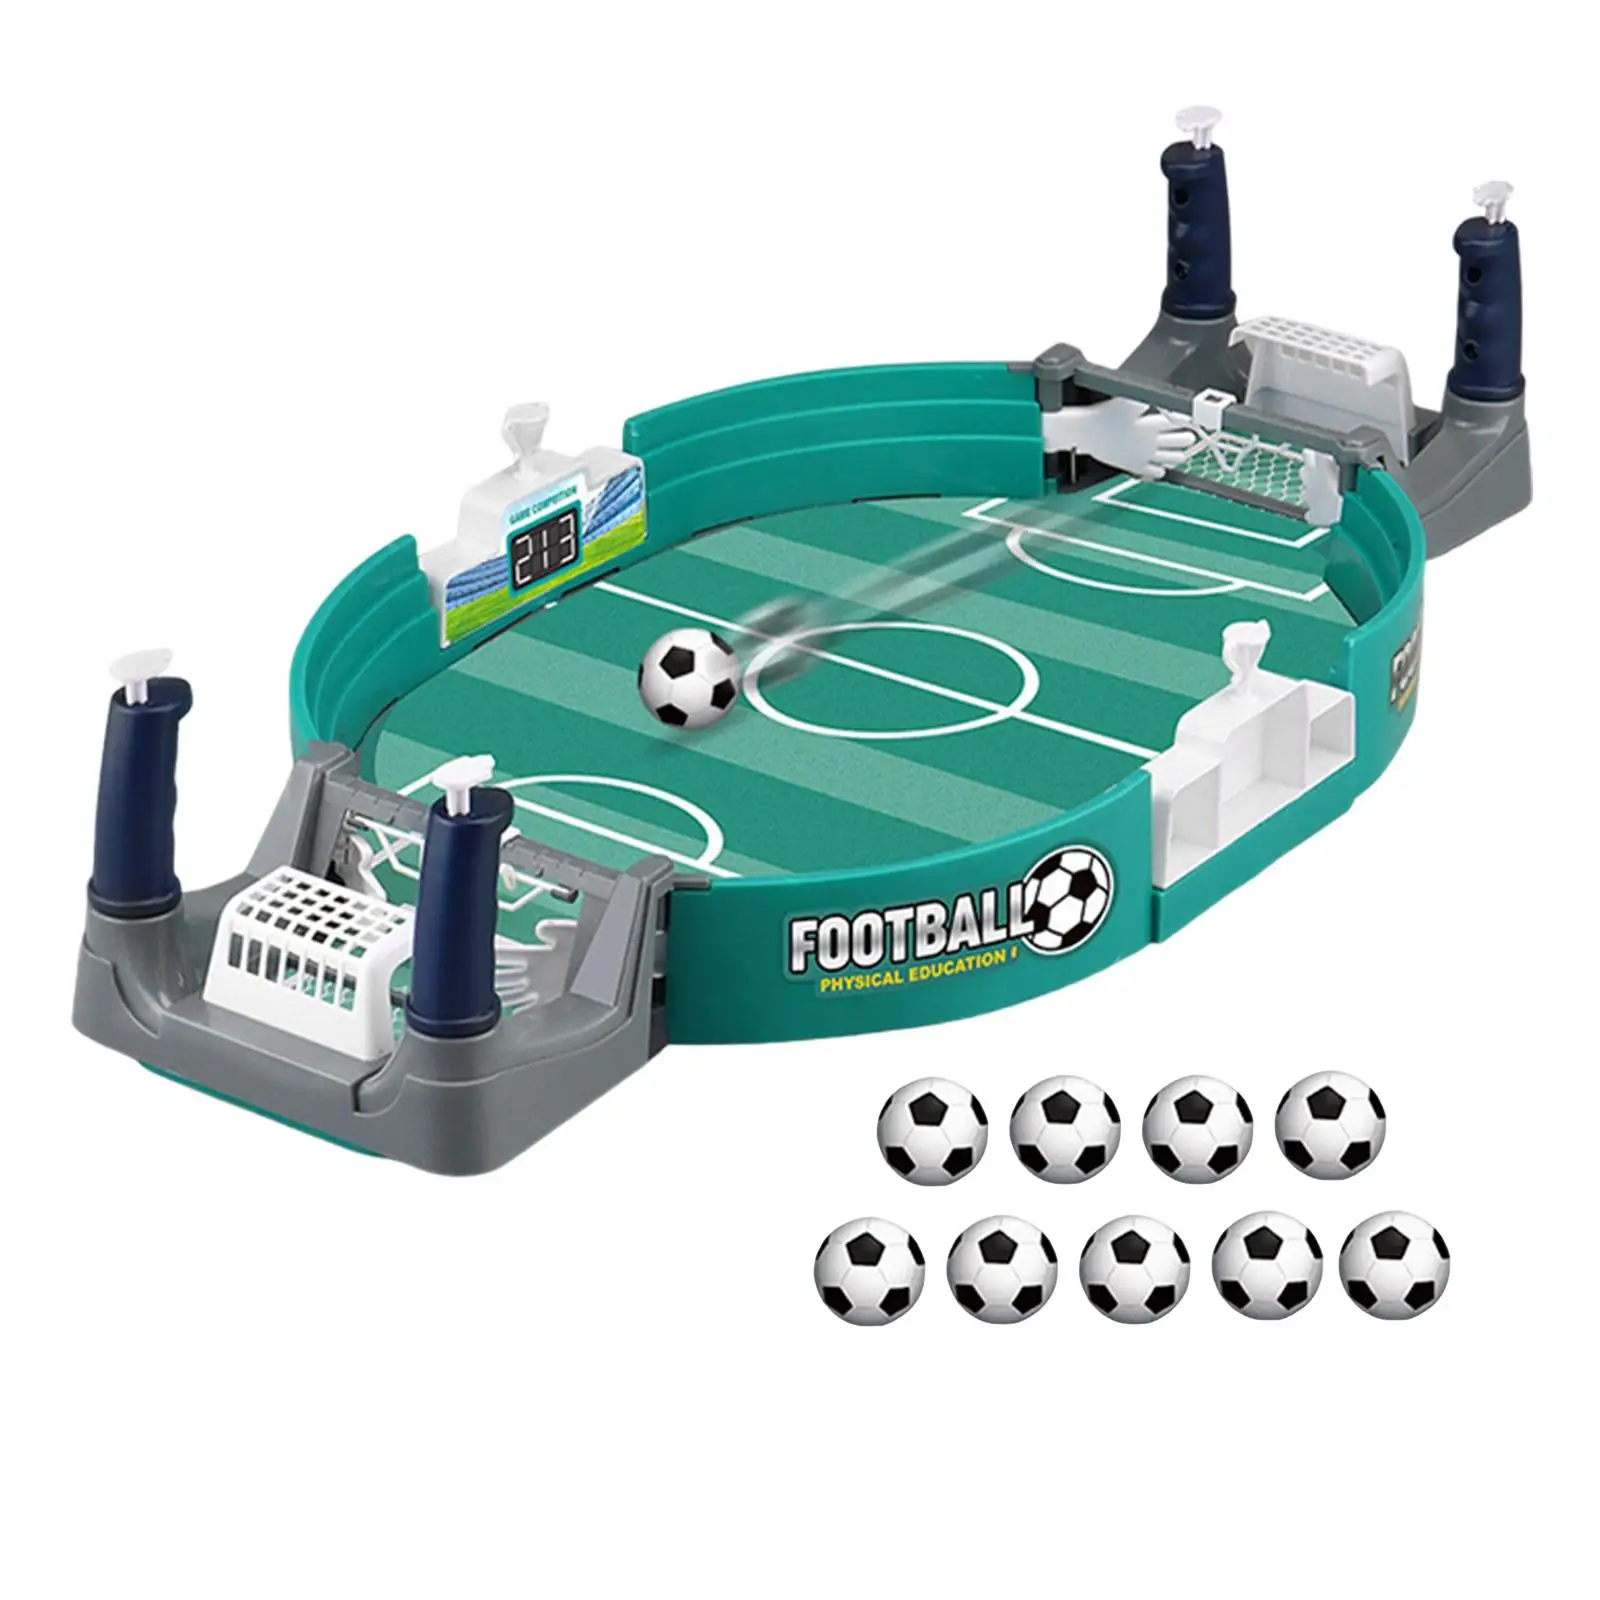 Foosball game hand-eye coordination for family entertainment kids adults